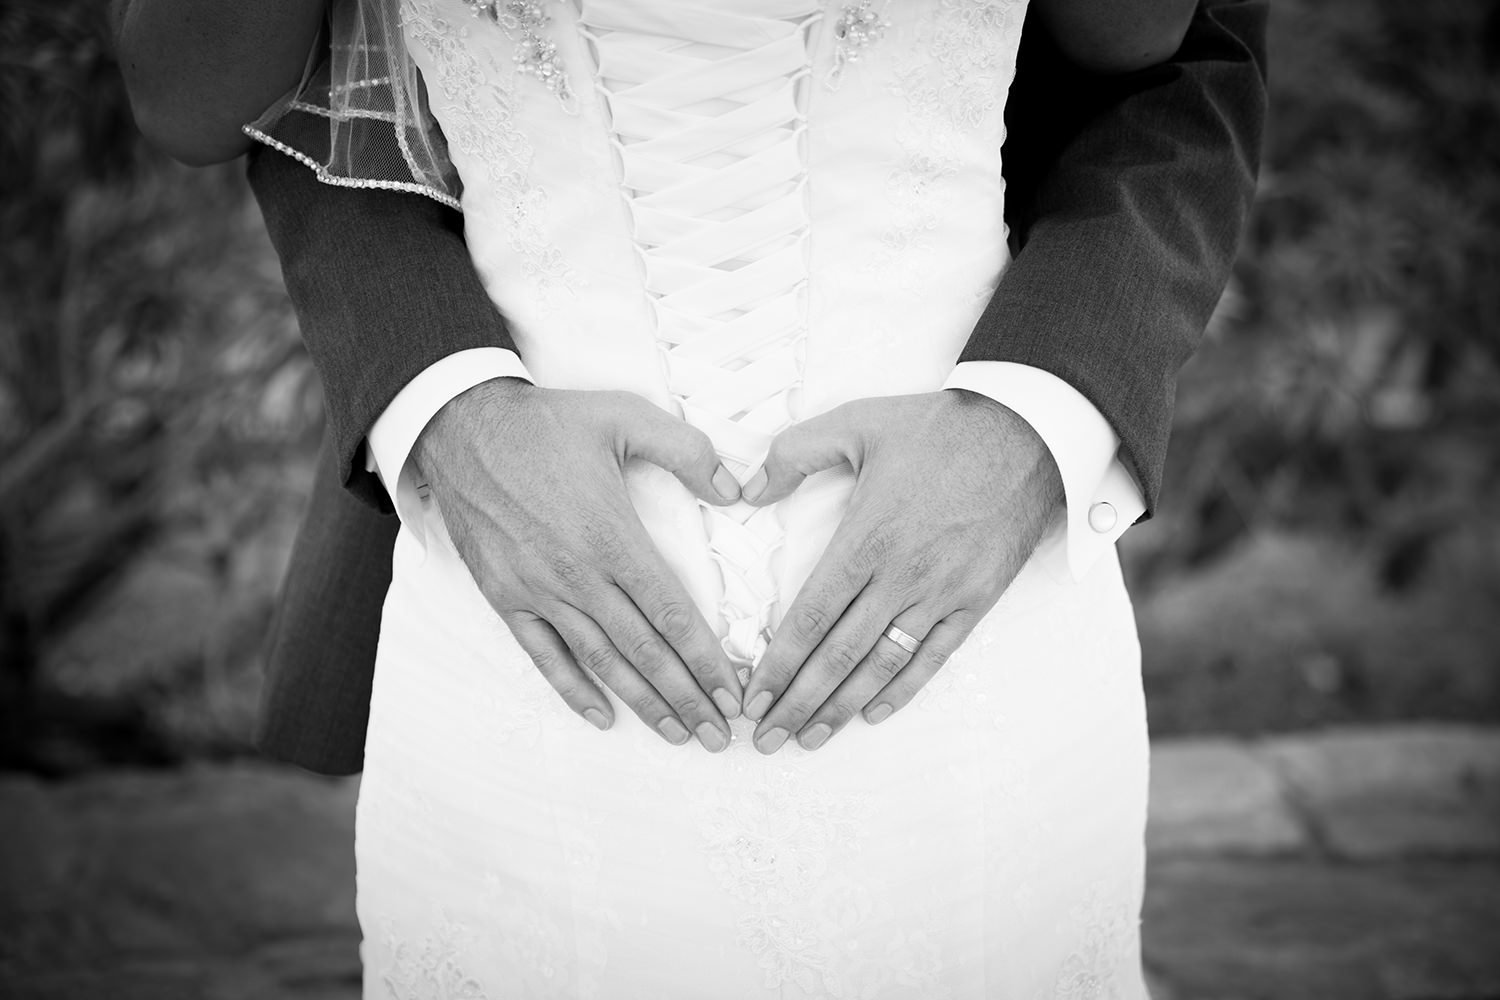 bride and groom romantic image at coronado community center heart with hands